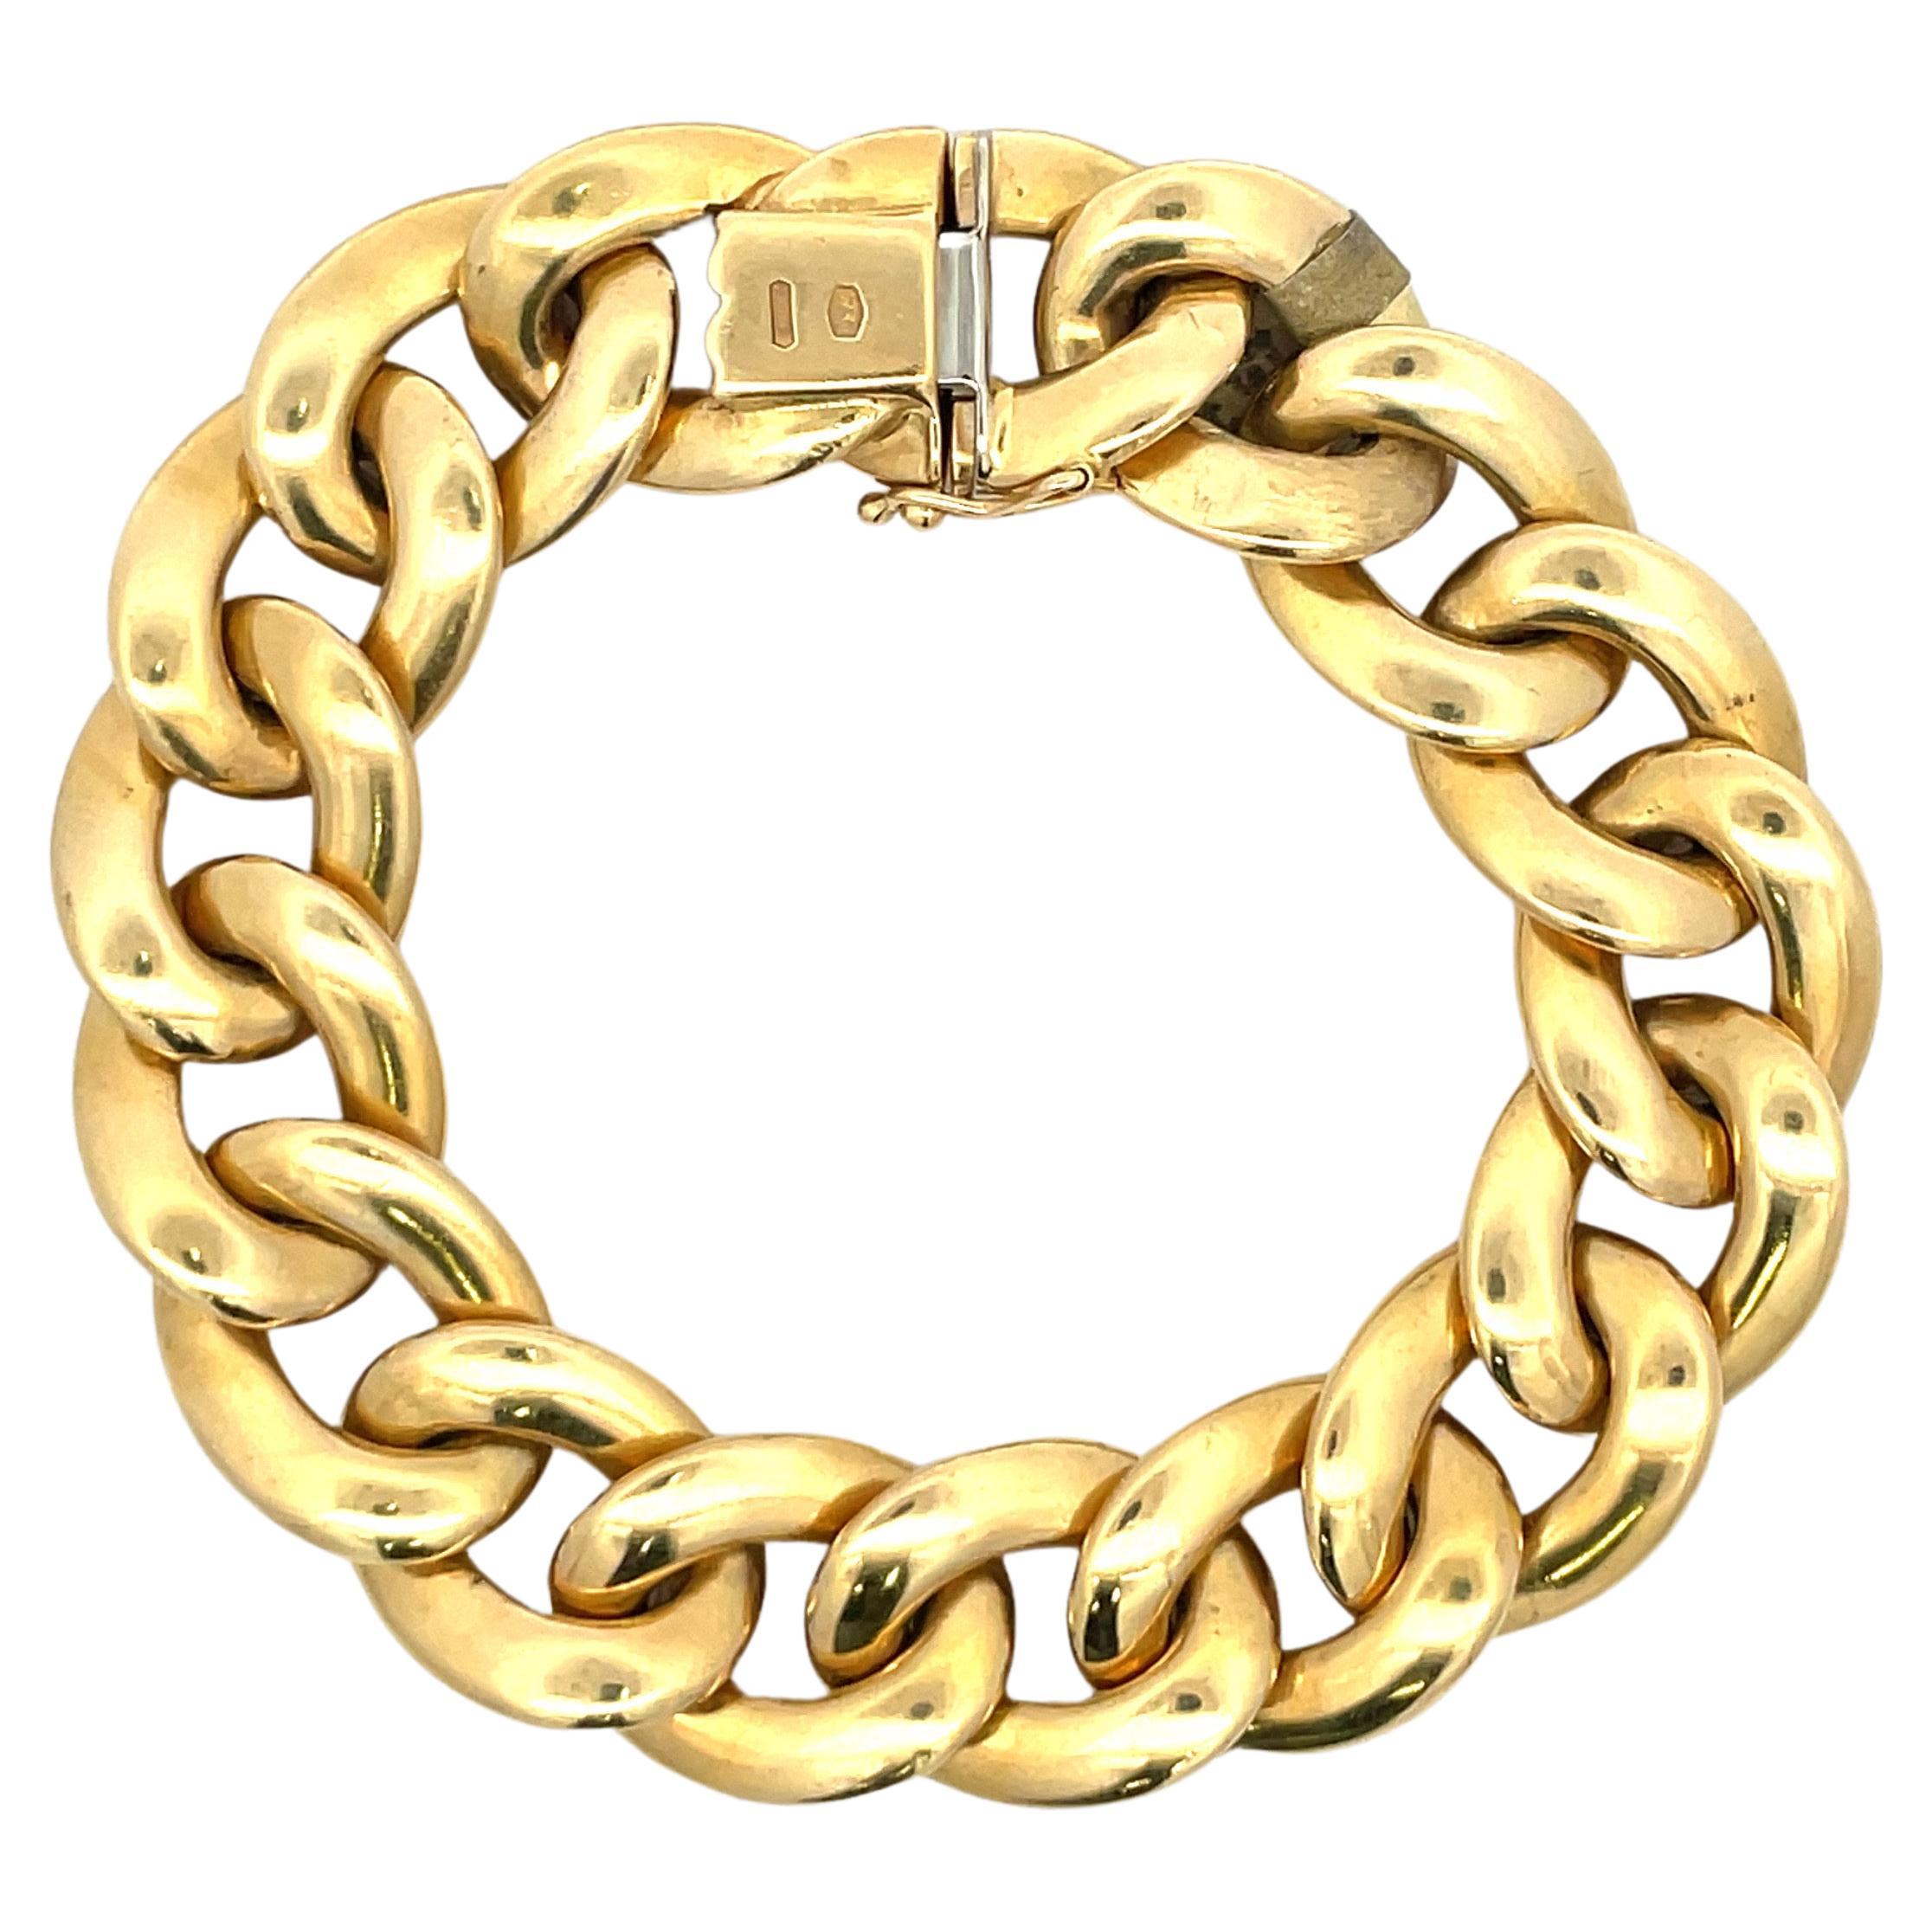 Vintage 18 karat yellow gold link bracelet featuring 17 Cuban links in a brushed finished weighing 41 grams.
Stamped 750 *470 VI

More link bracelets available.
Search Harbor Diamonds